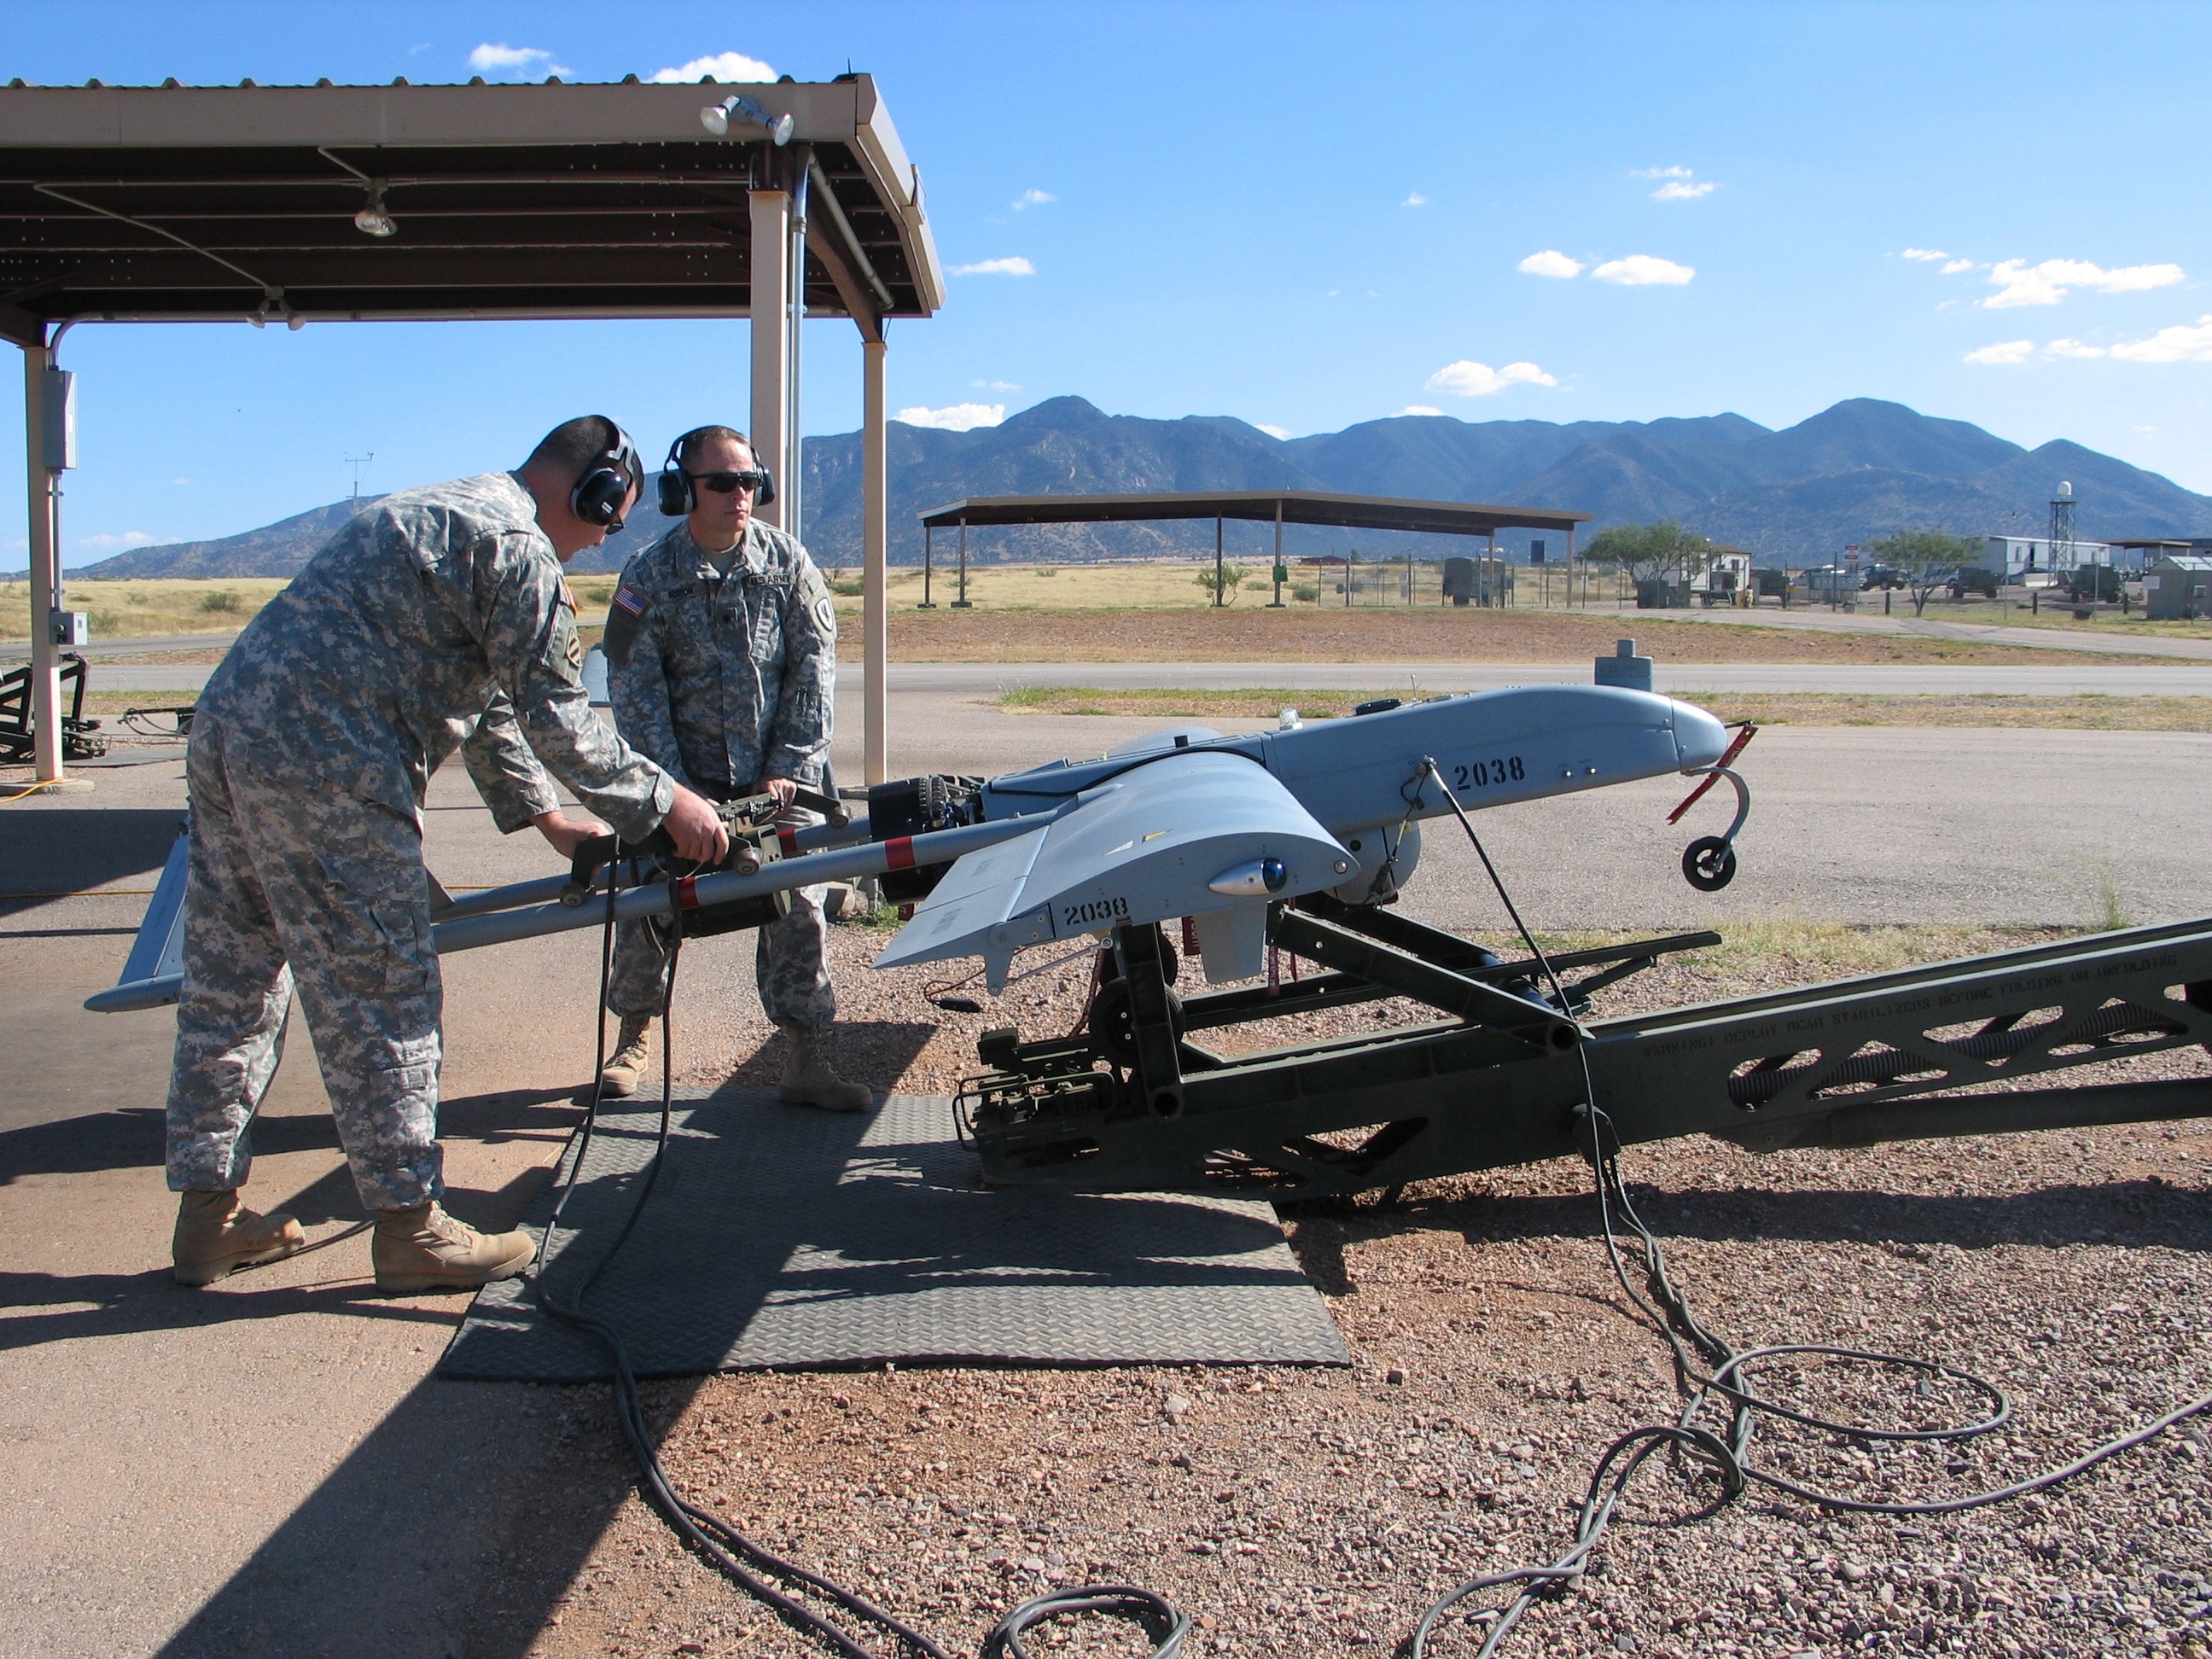 Unmanned military drone crashes at Fort Drum airfield near Watertown, officials say syracuse.com